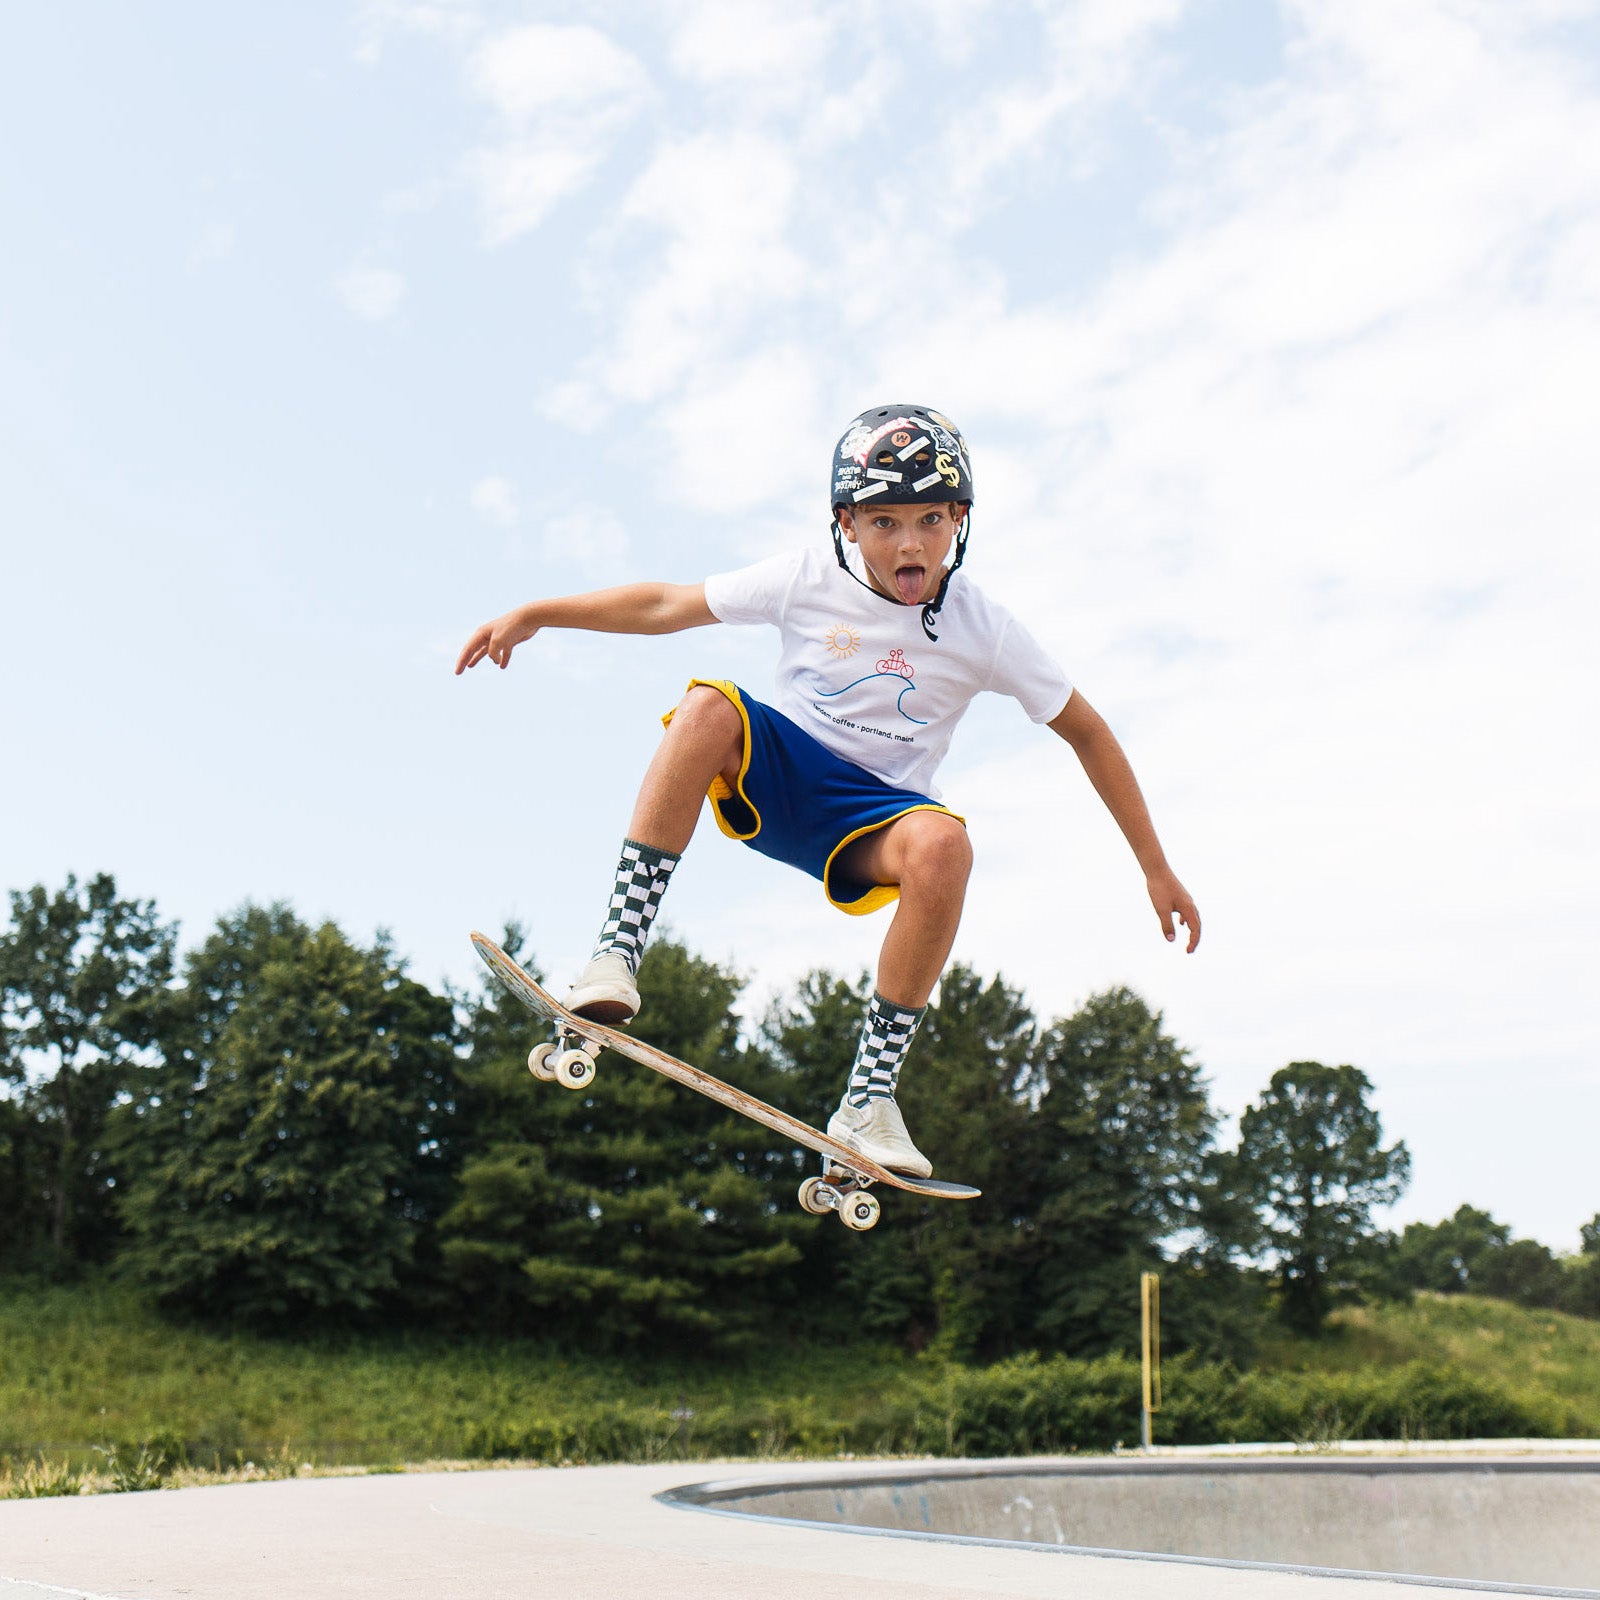 A young boy wearing a helmet, knee pads, and a Tandem Kids Tandem Sun Tee performs a mid-air skateboarding trick at a skatepark under a clear sky.